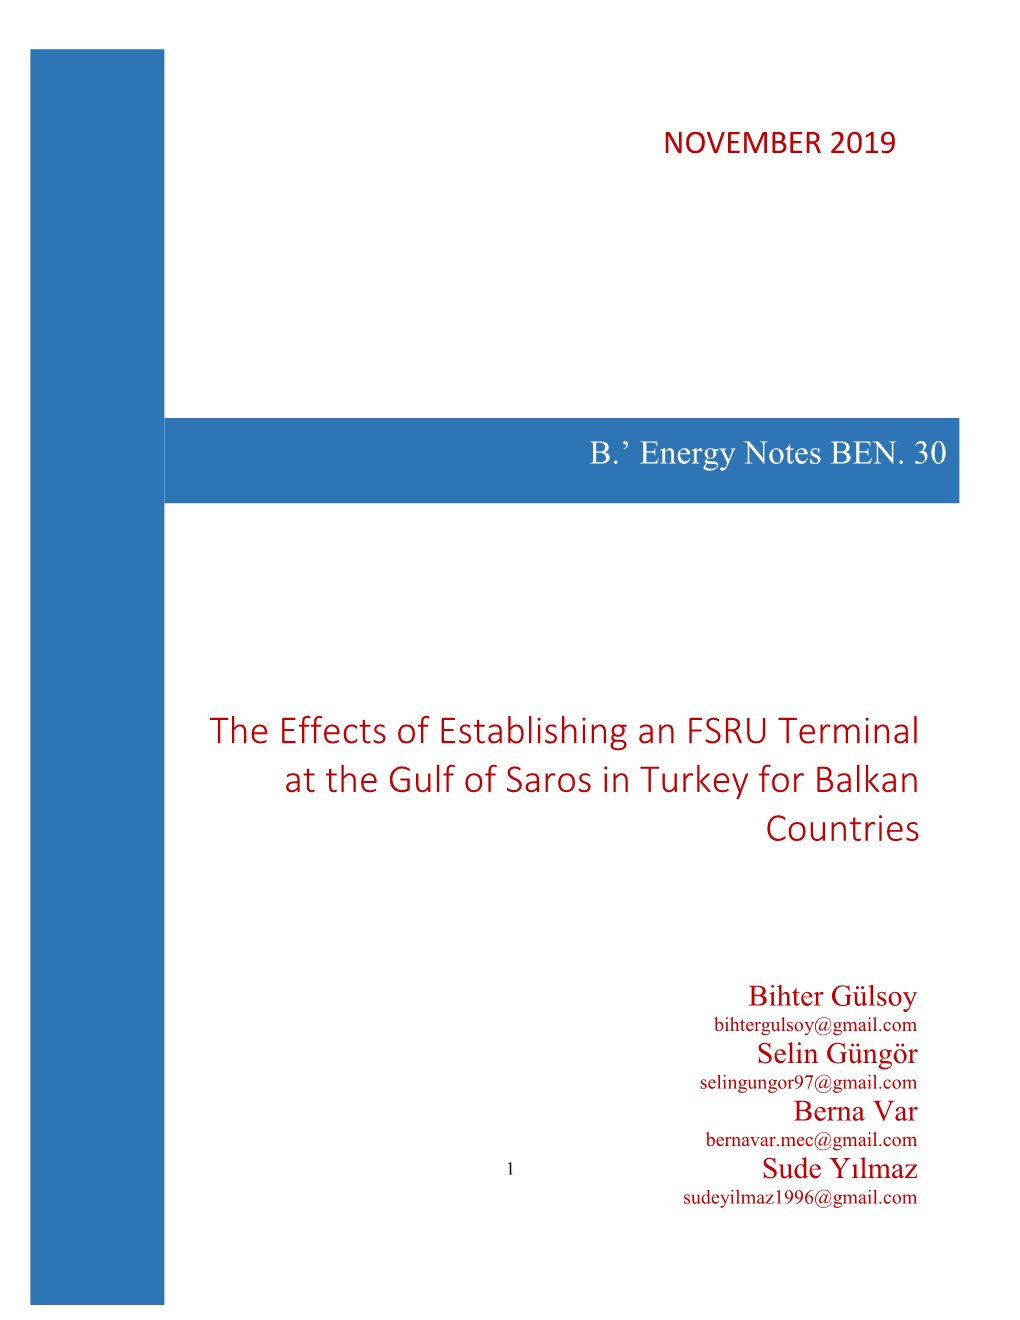 The Effects of Establishing an FSRU Terminal at the Gulf of Saros in Turkey for Balkan Countries